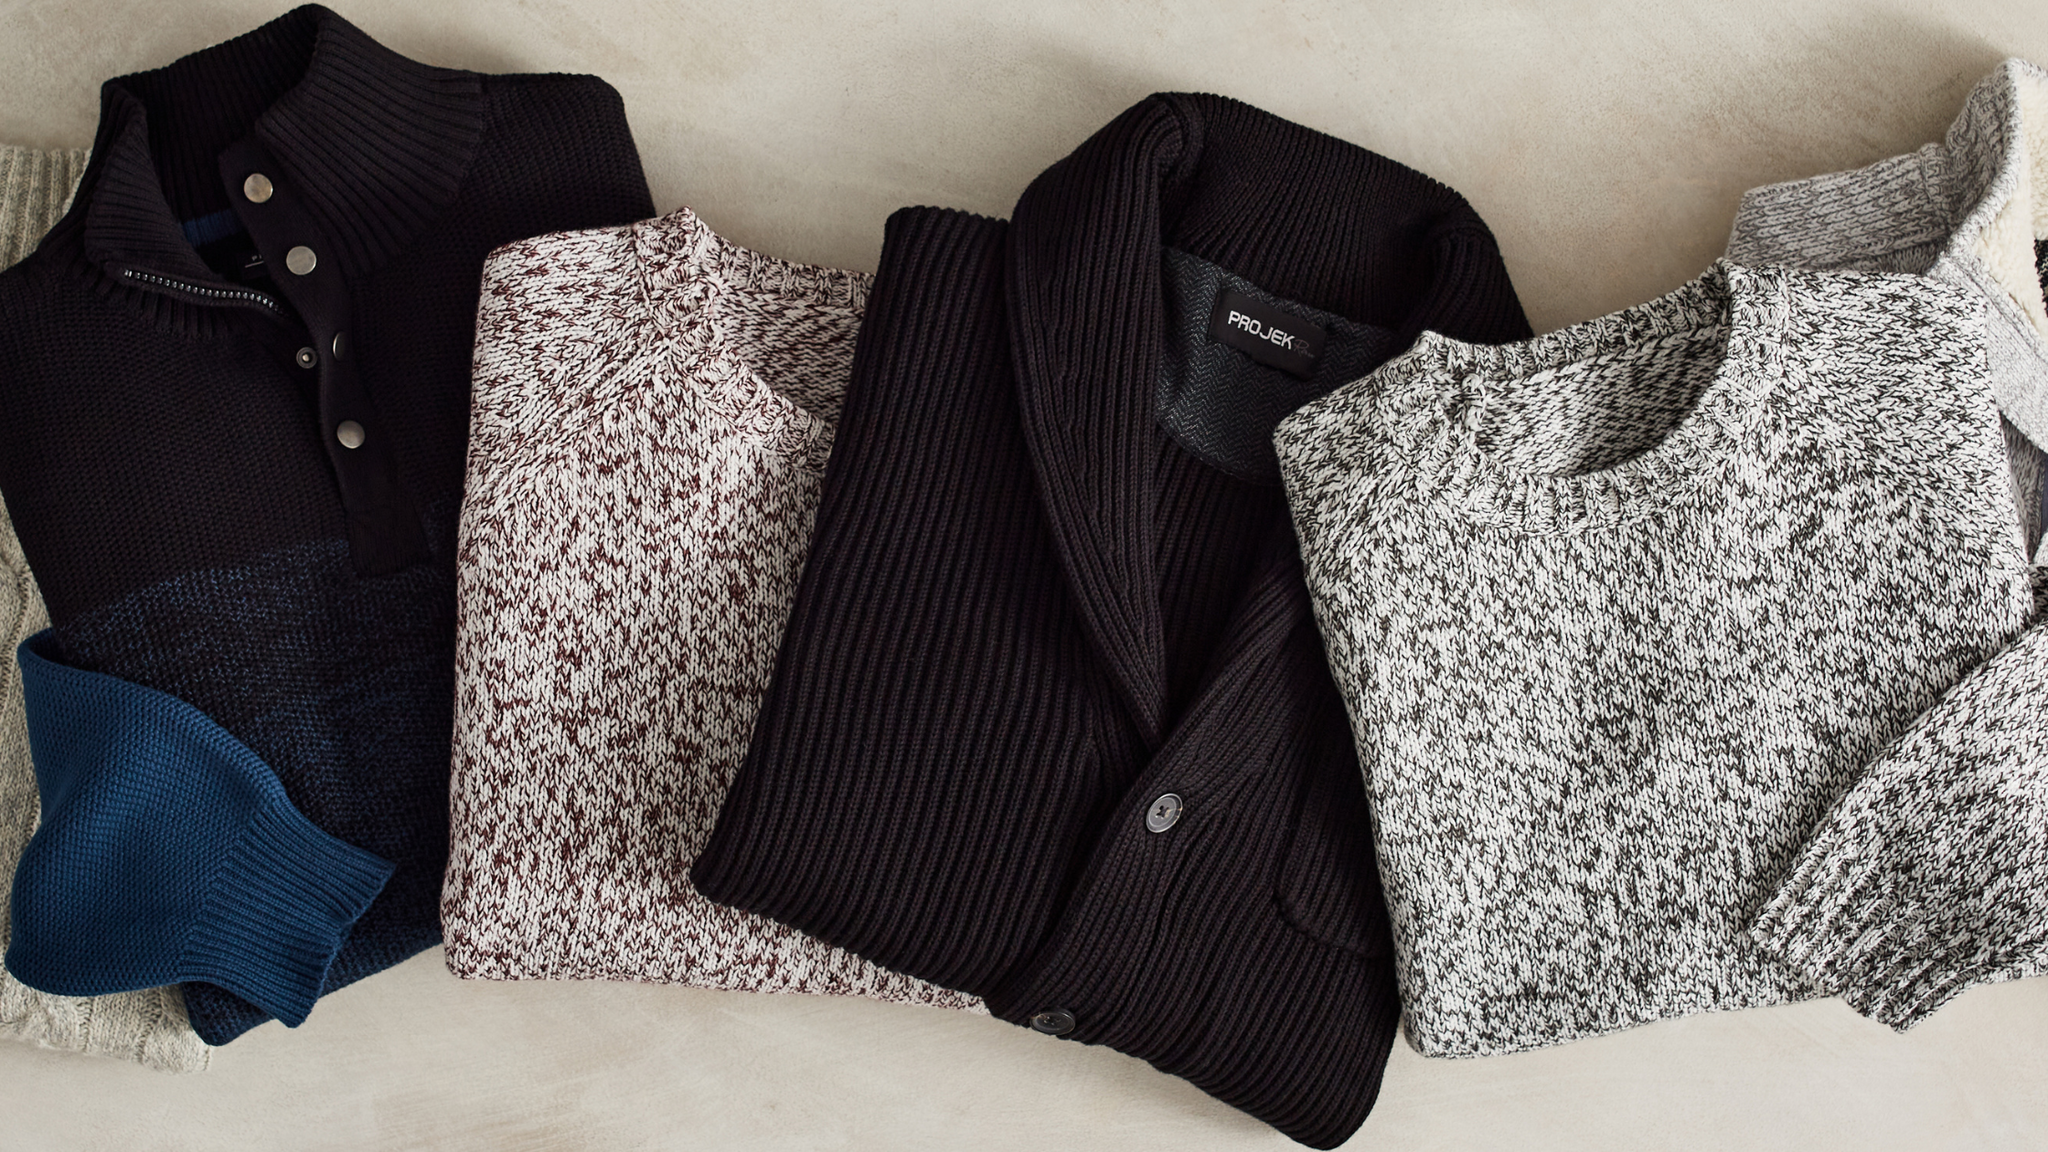 Stay Warm in Winter with These Perfect Combinations